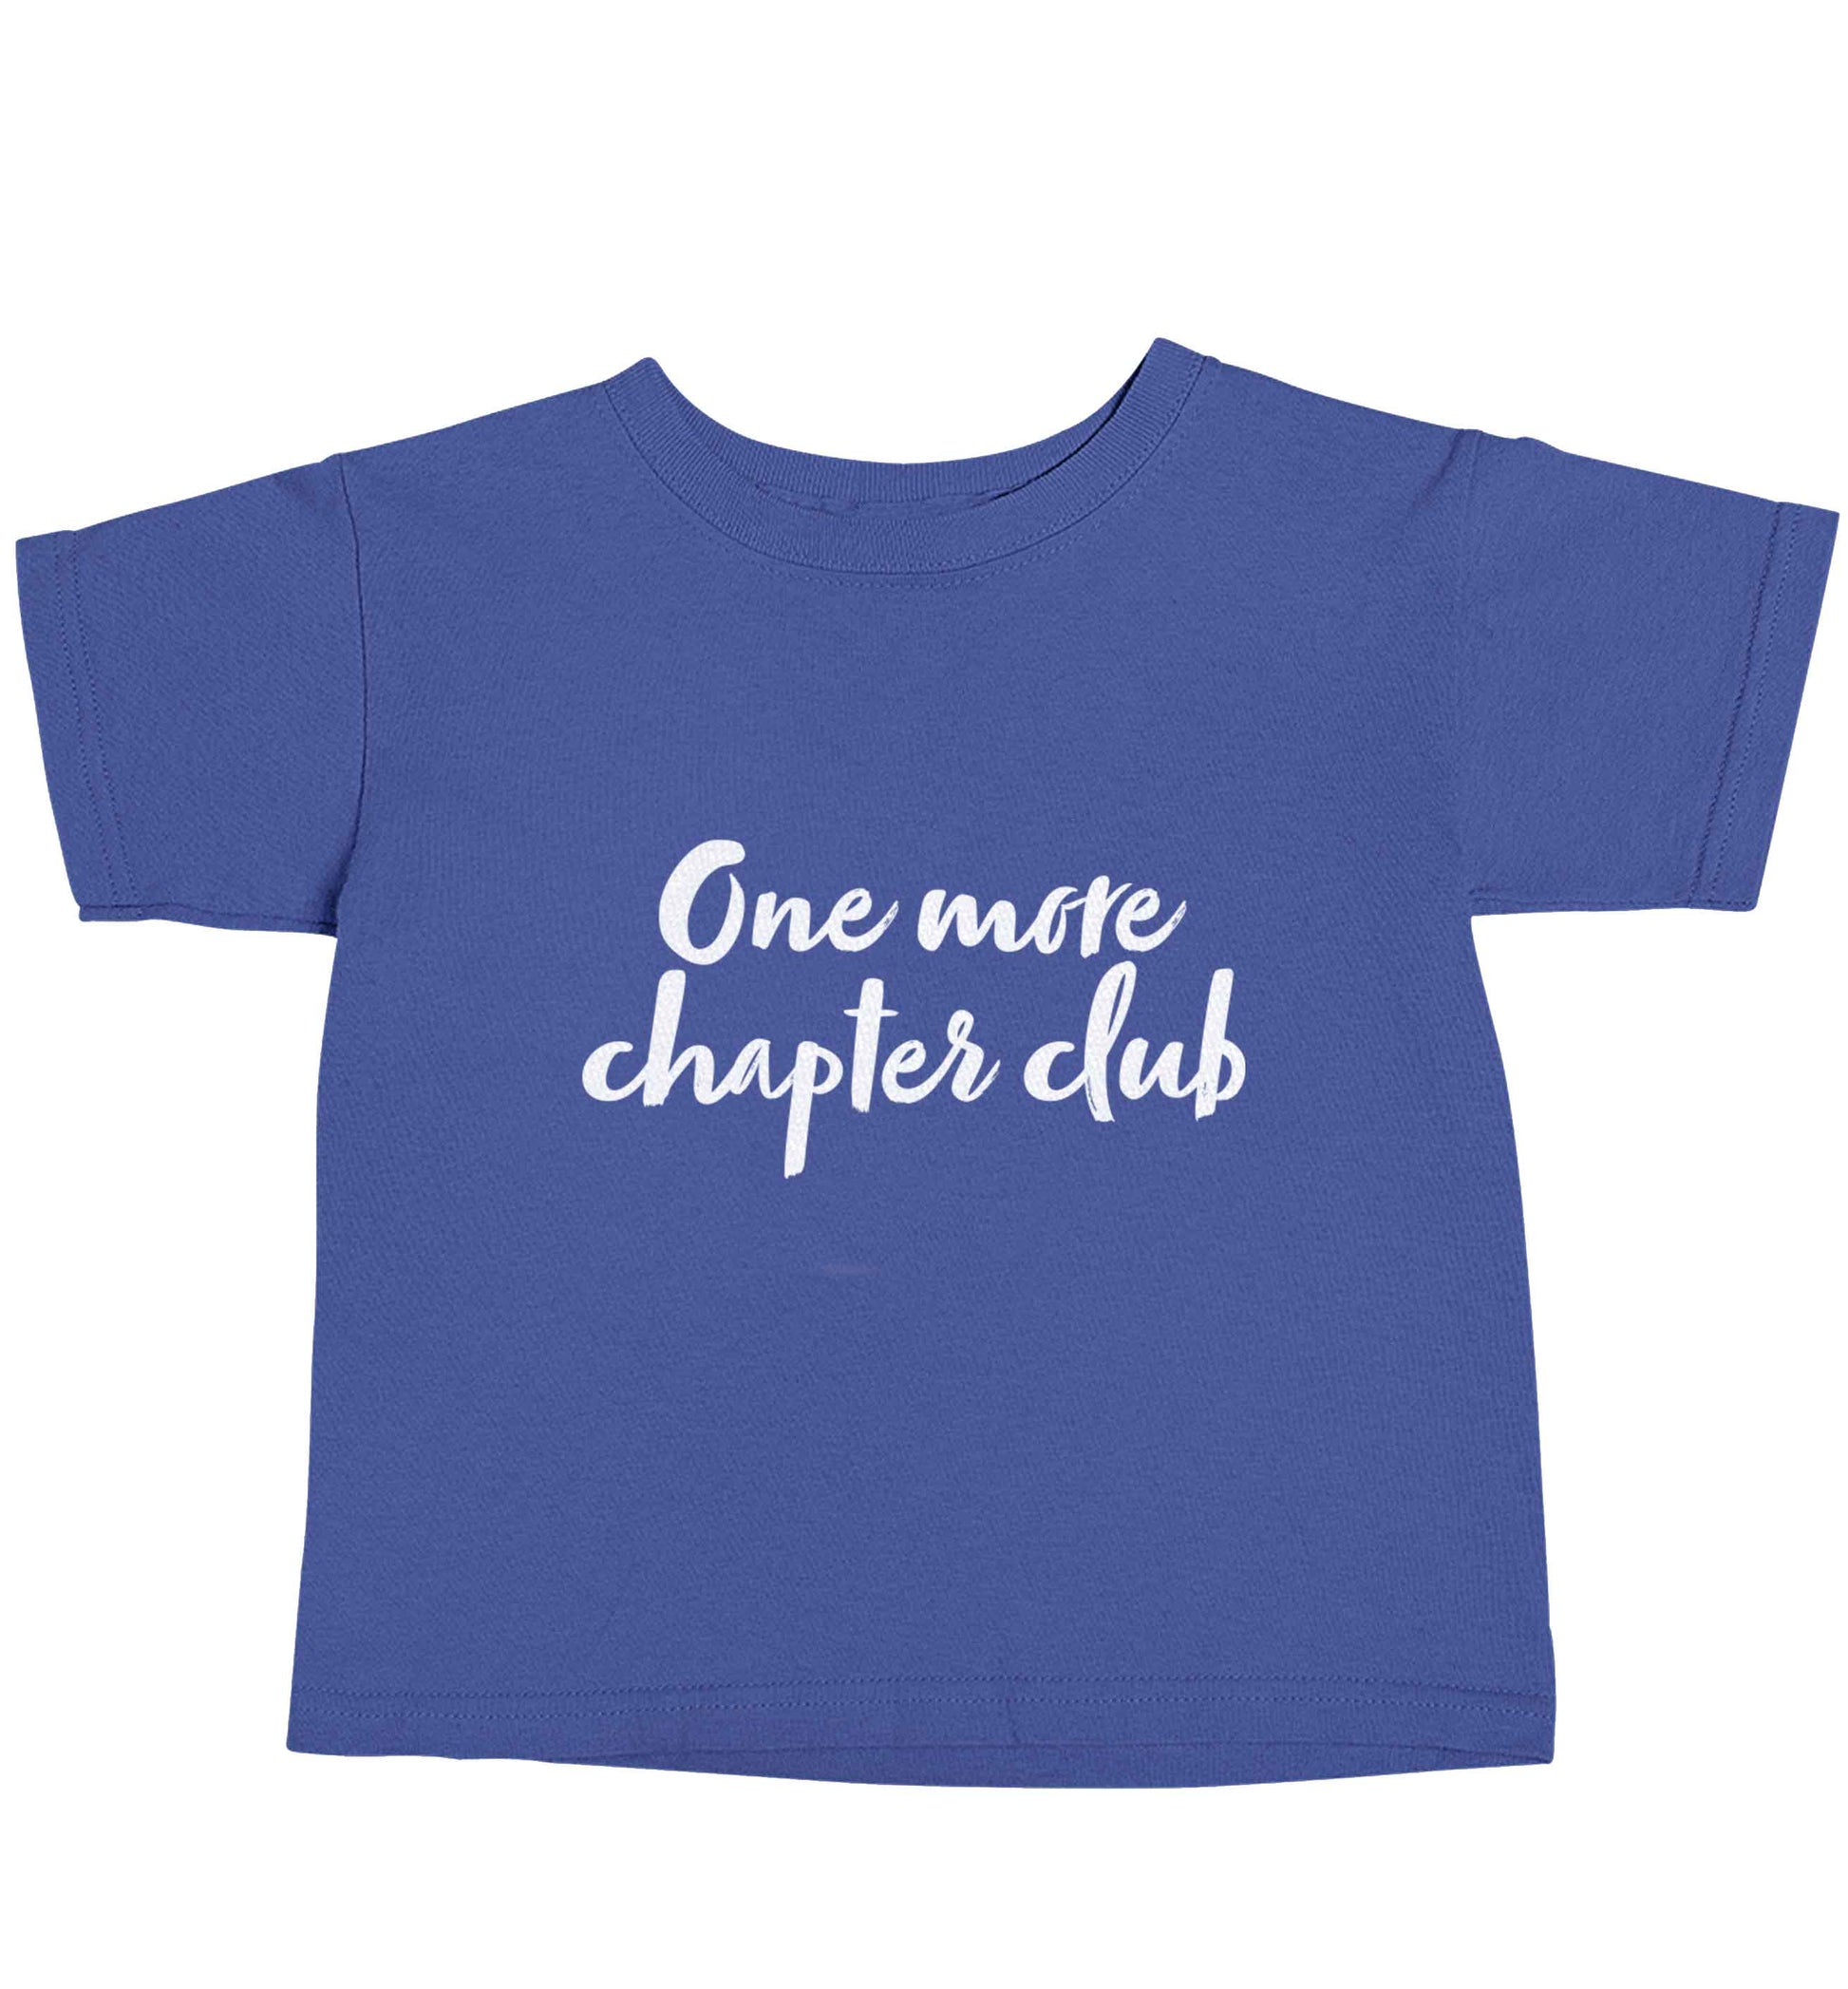 One more chapter club Kit blue baby toddler Tshirt 2 Years